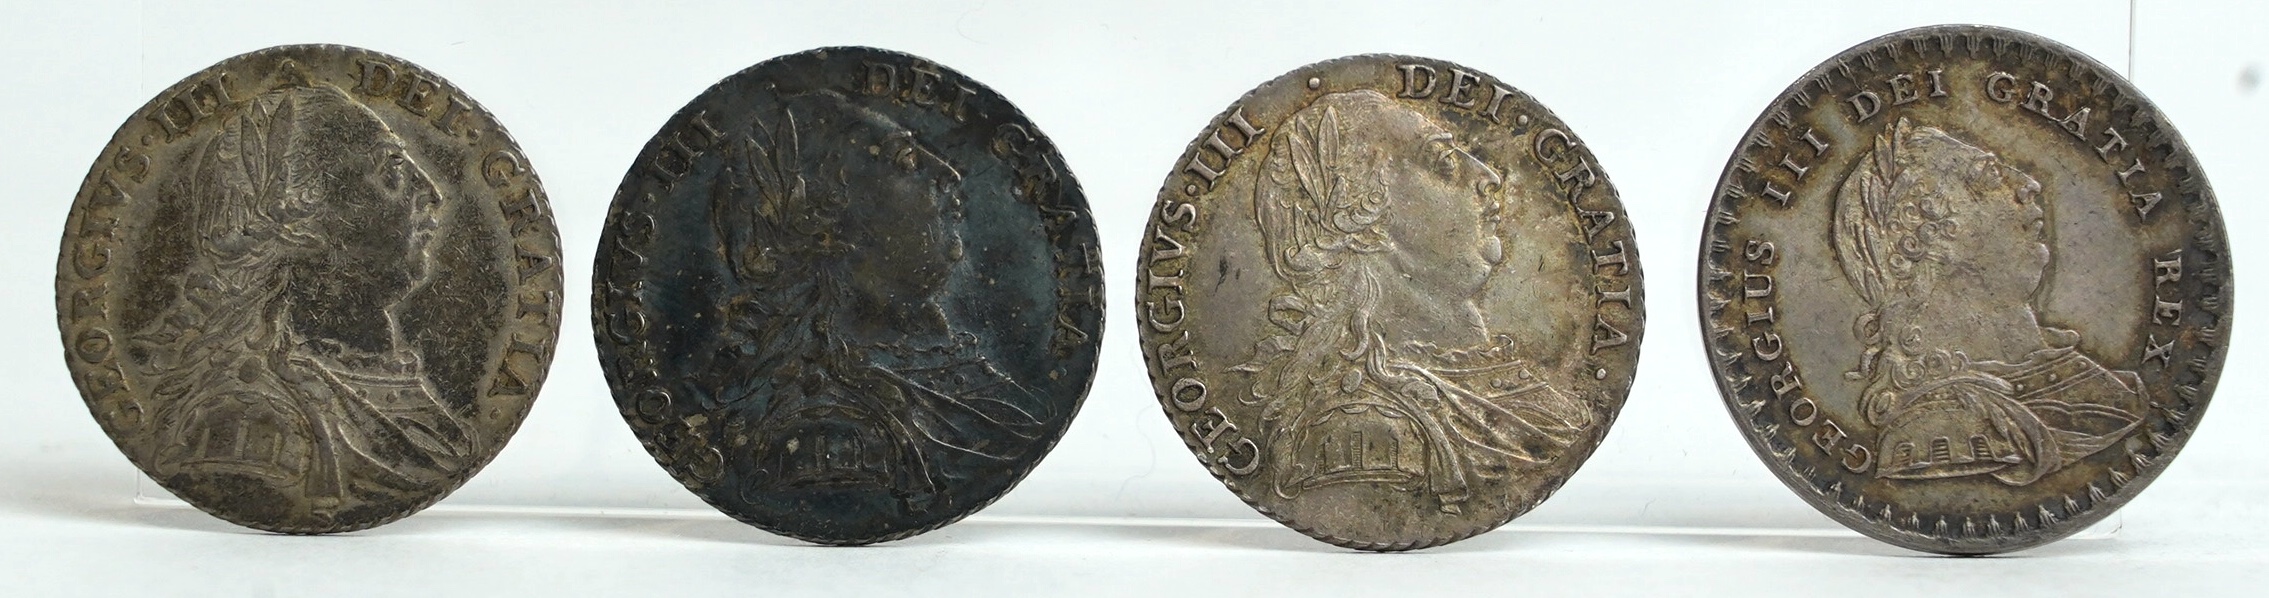 British silver coins, George III, three shilling coins, 1787, good VF to about EF, and Bank token eighteenpence (1S.6D.) 1811, near EF (4)